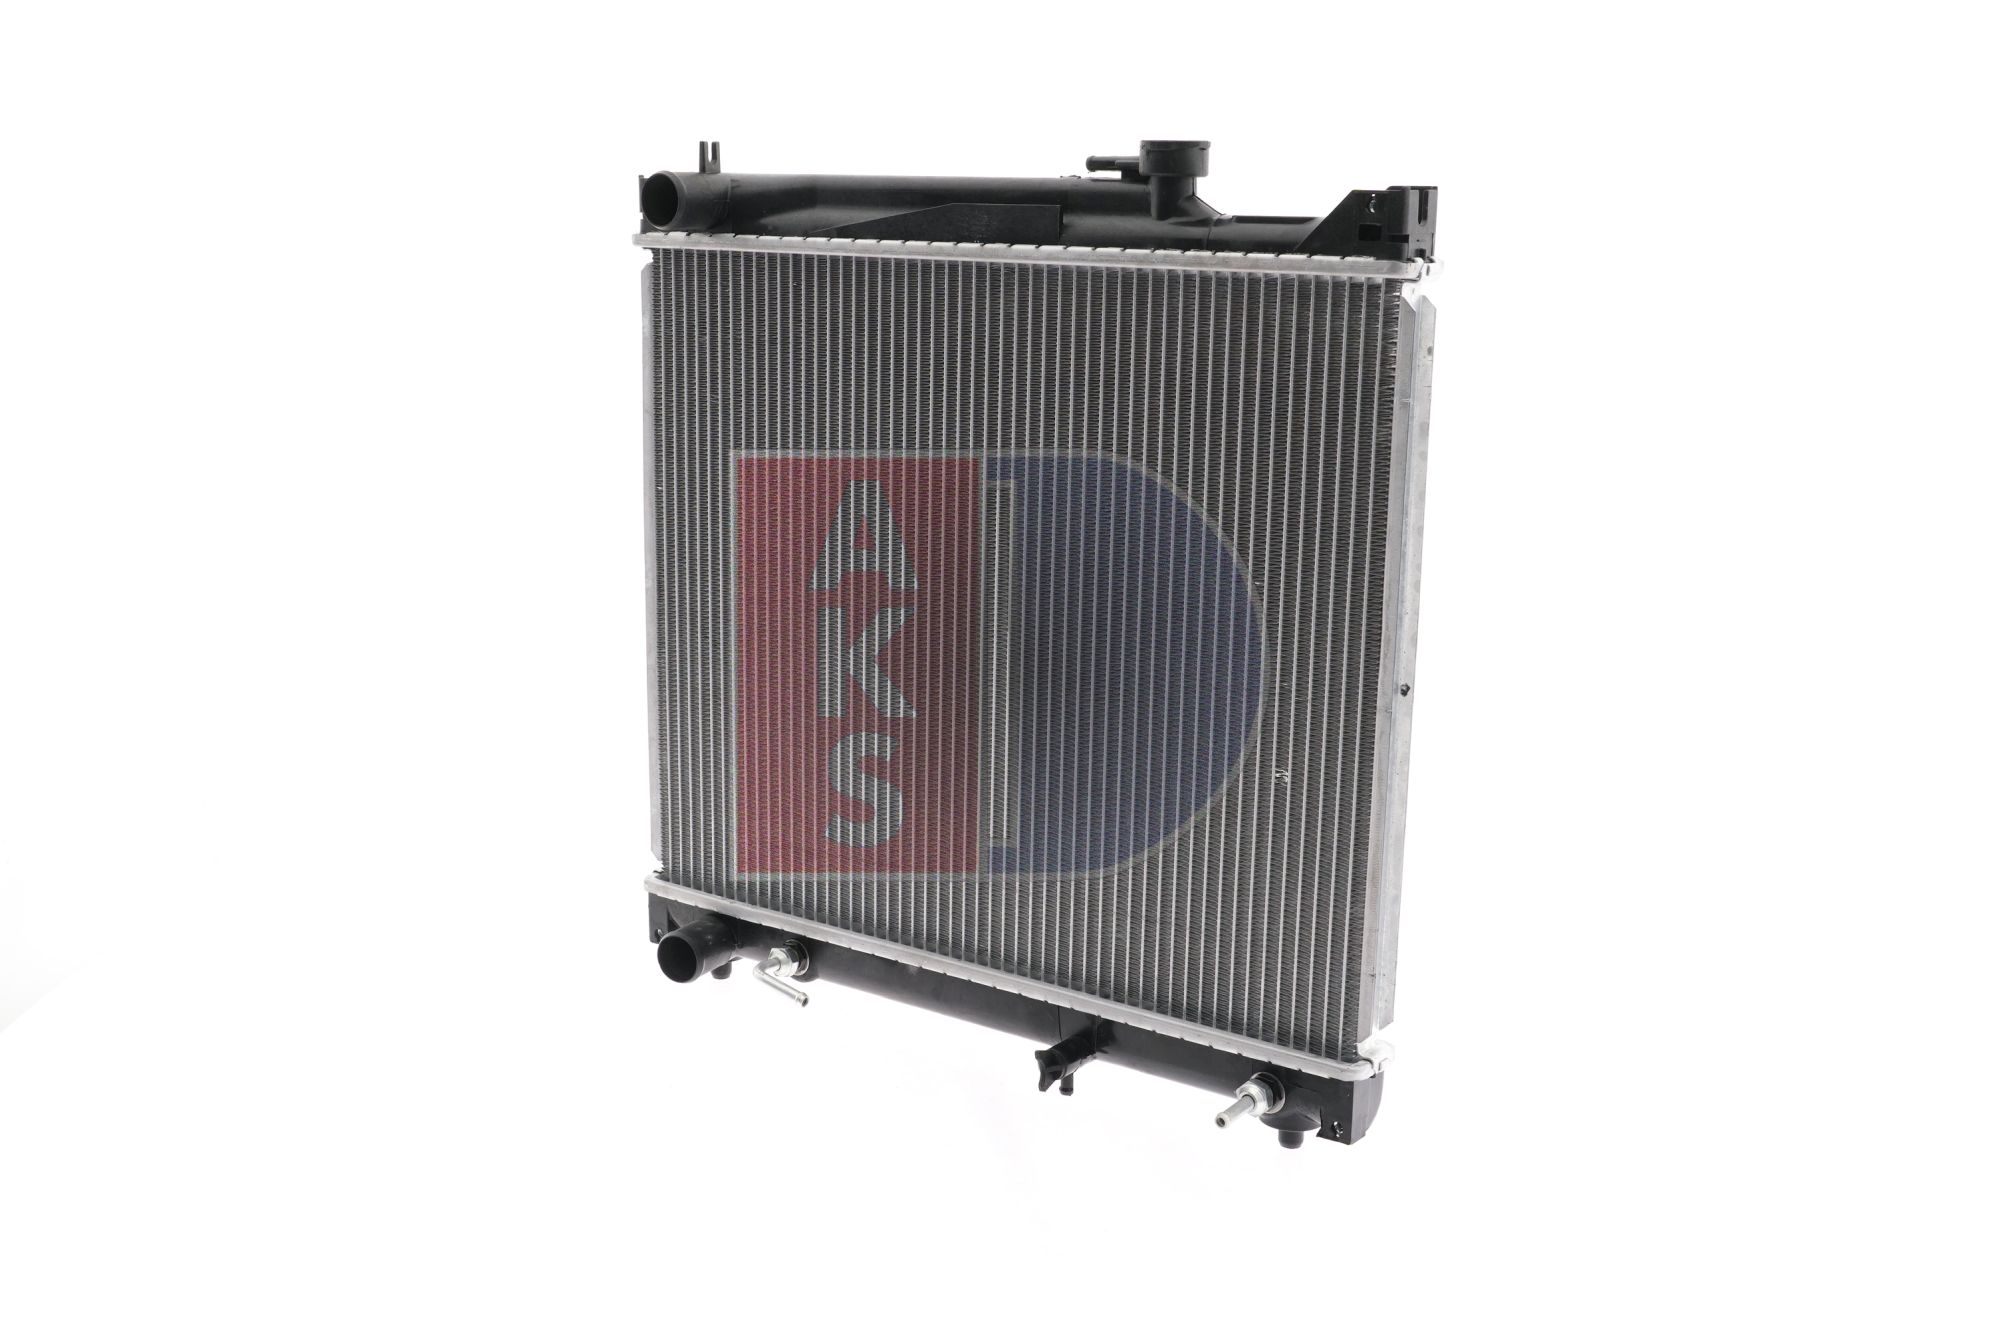 AKS DASIS 320450N Engine radiator for vehicles with/without air conditioning, 425 x 526 x 27 mm, Manual-/optional automatic transmission, Brazed cooling fins